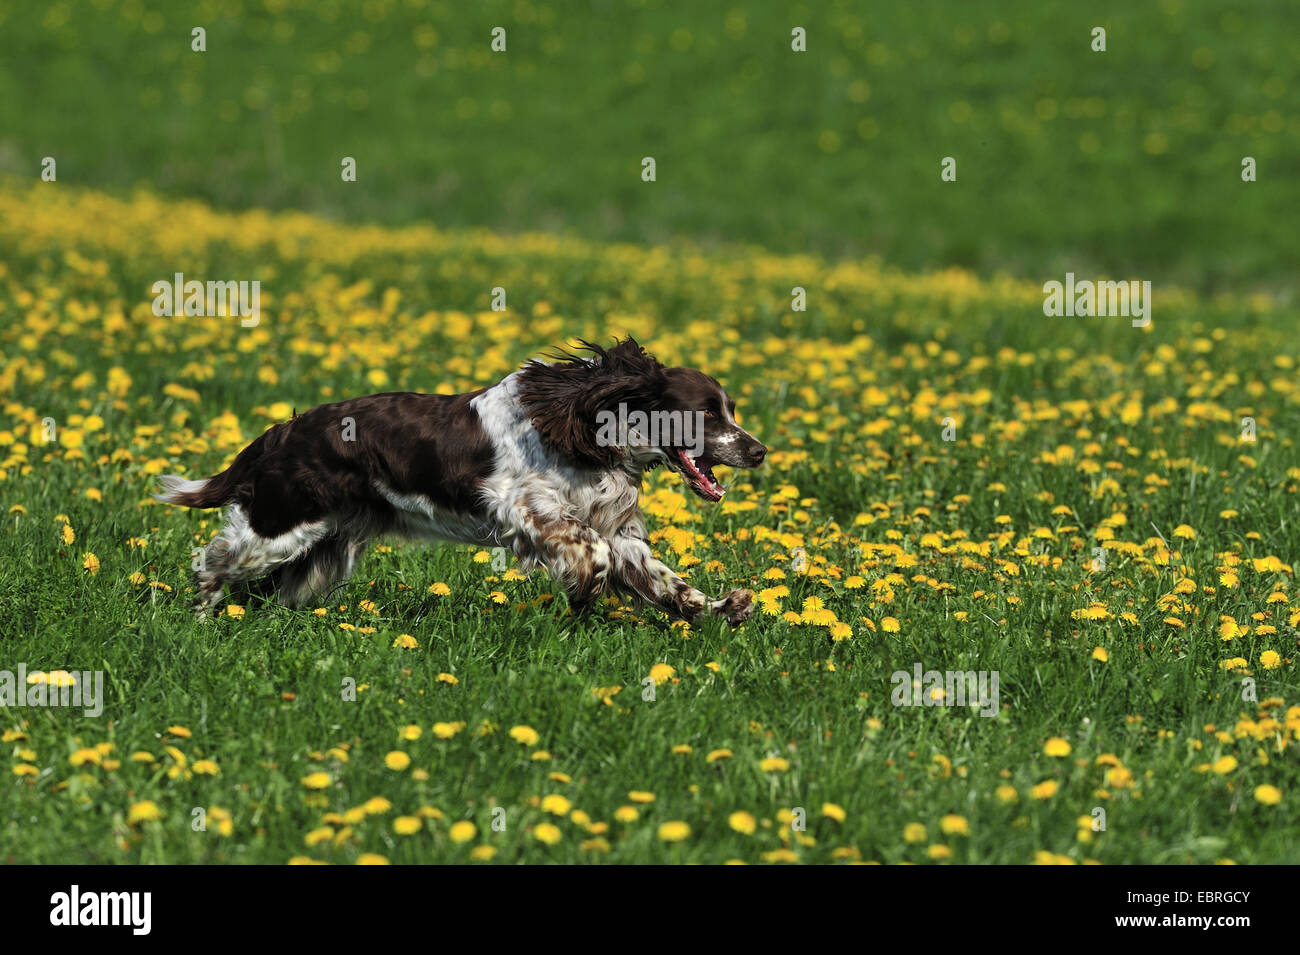 English Springer Spaniel (Canis lupus f. familiaris), running in a dandelion meadow , Germany Stock Photo